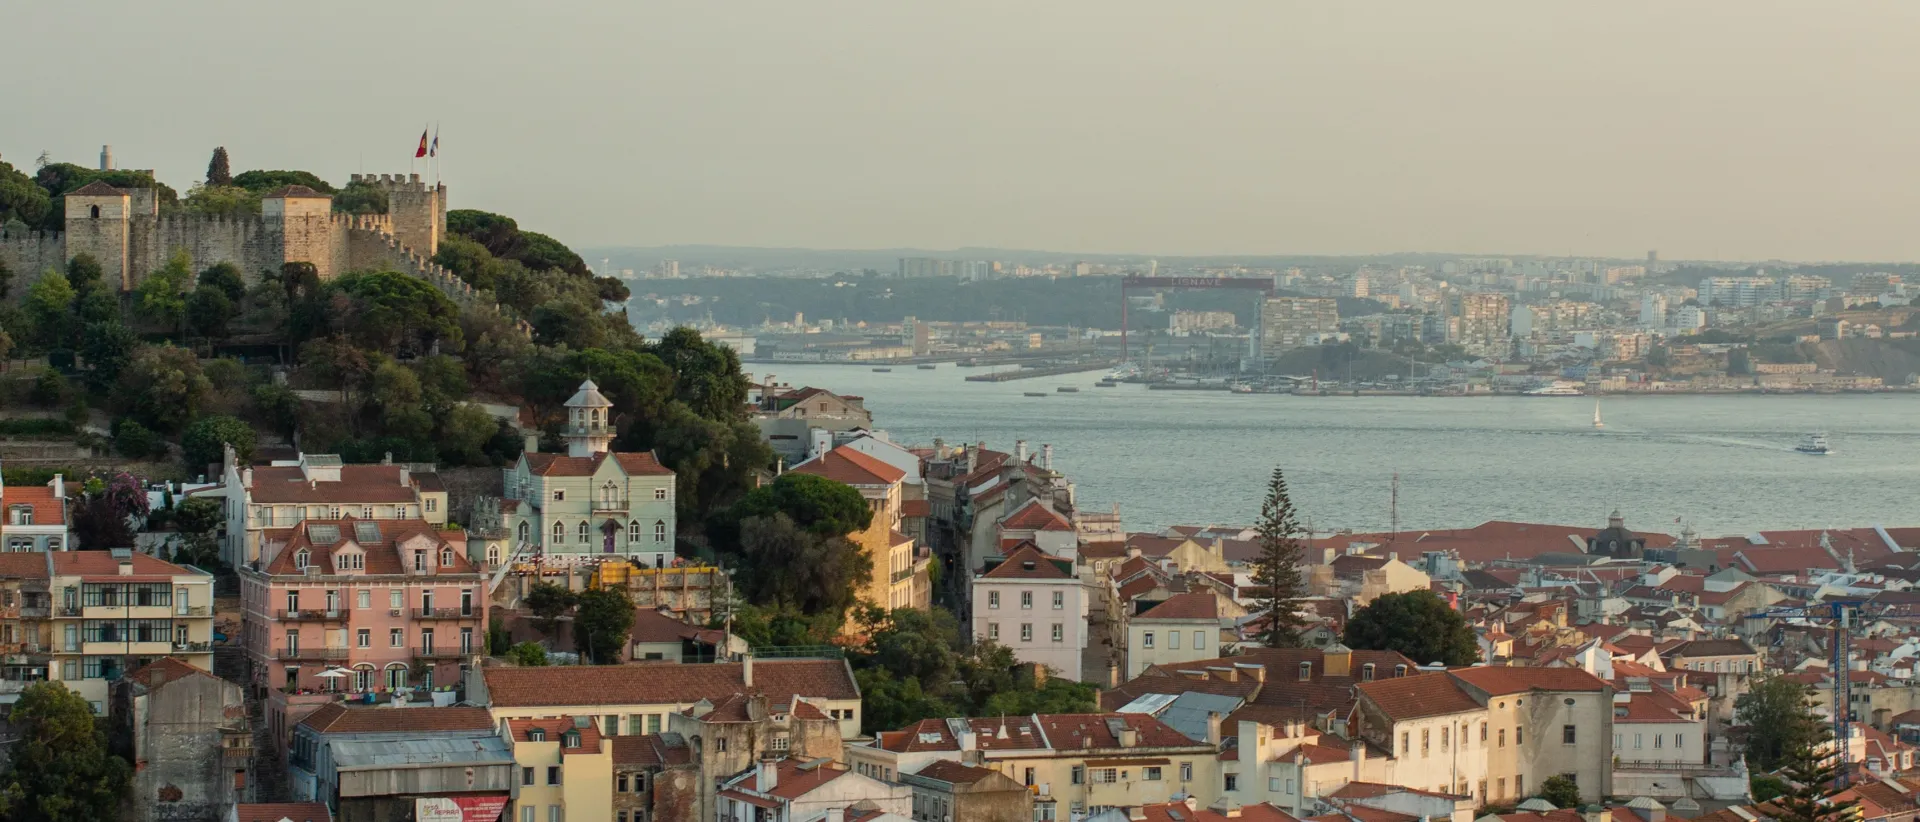 Opening of New Site in Lisbon (Portugal) to Expand Talent Pool (Photo by Katya Shkiper on Unsplash)